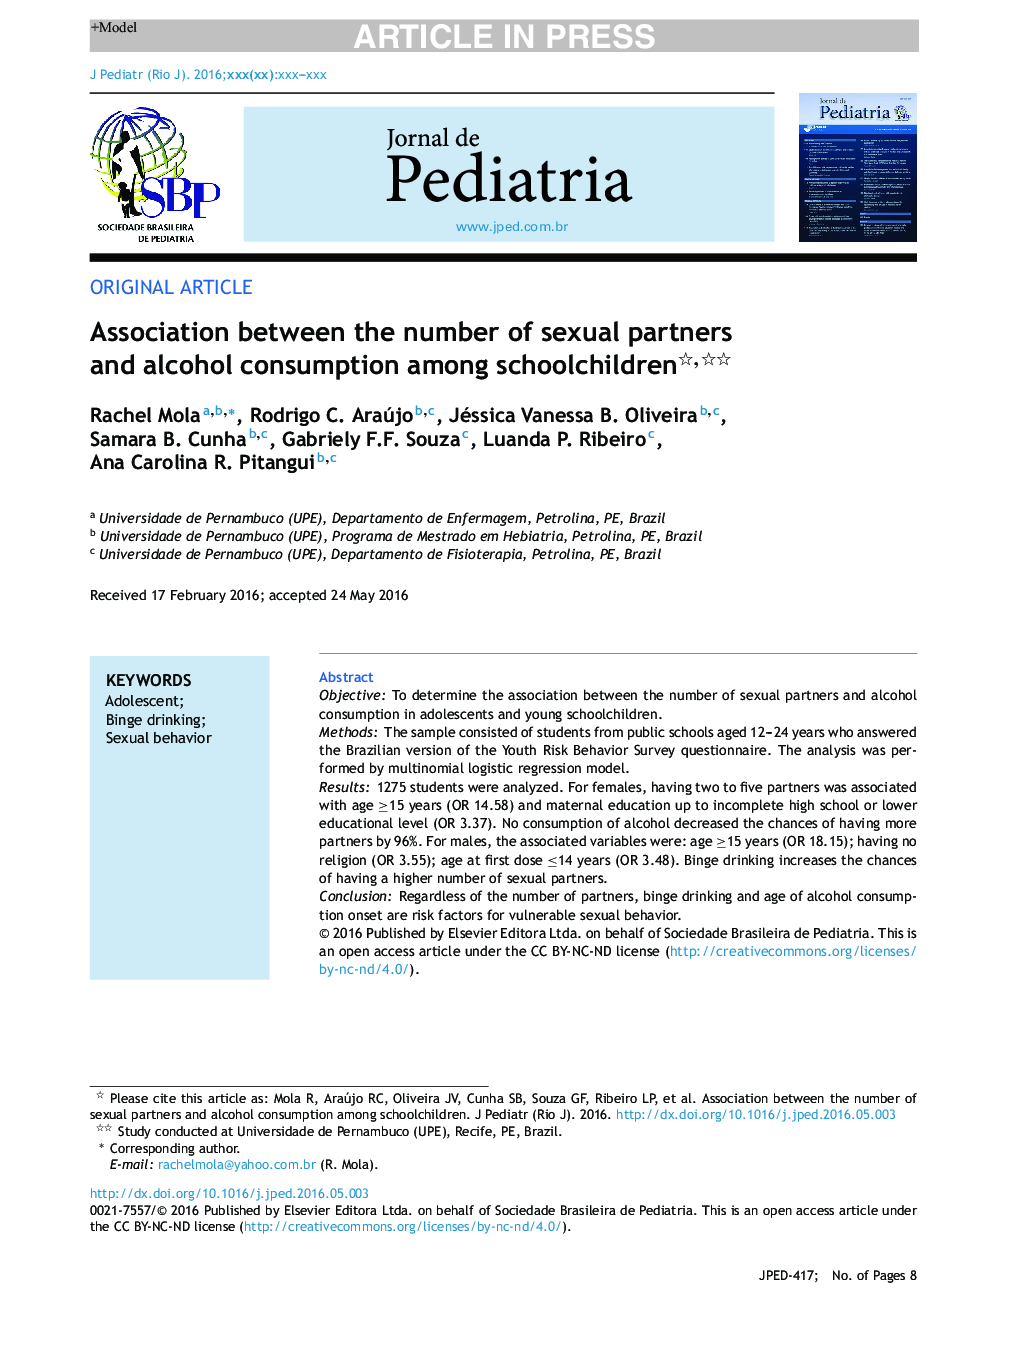 Association between the number of sexual partners and alcohol consumption among schoolchildren